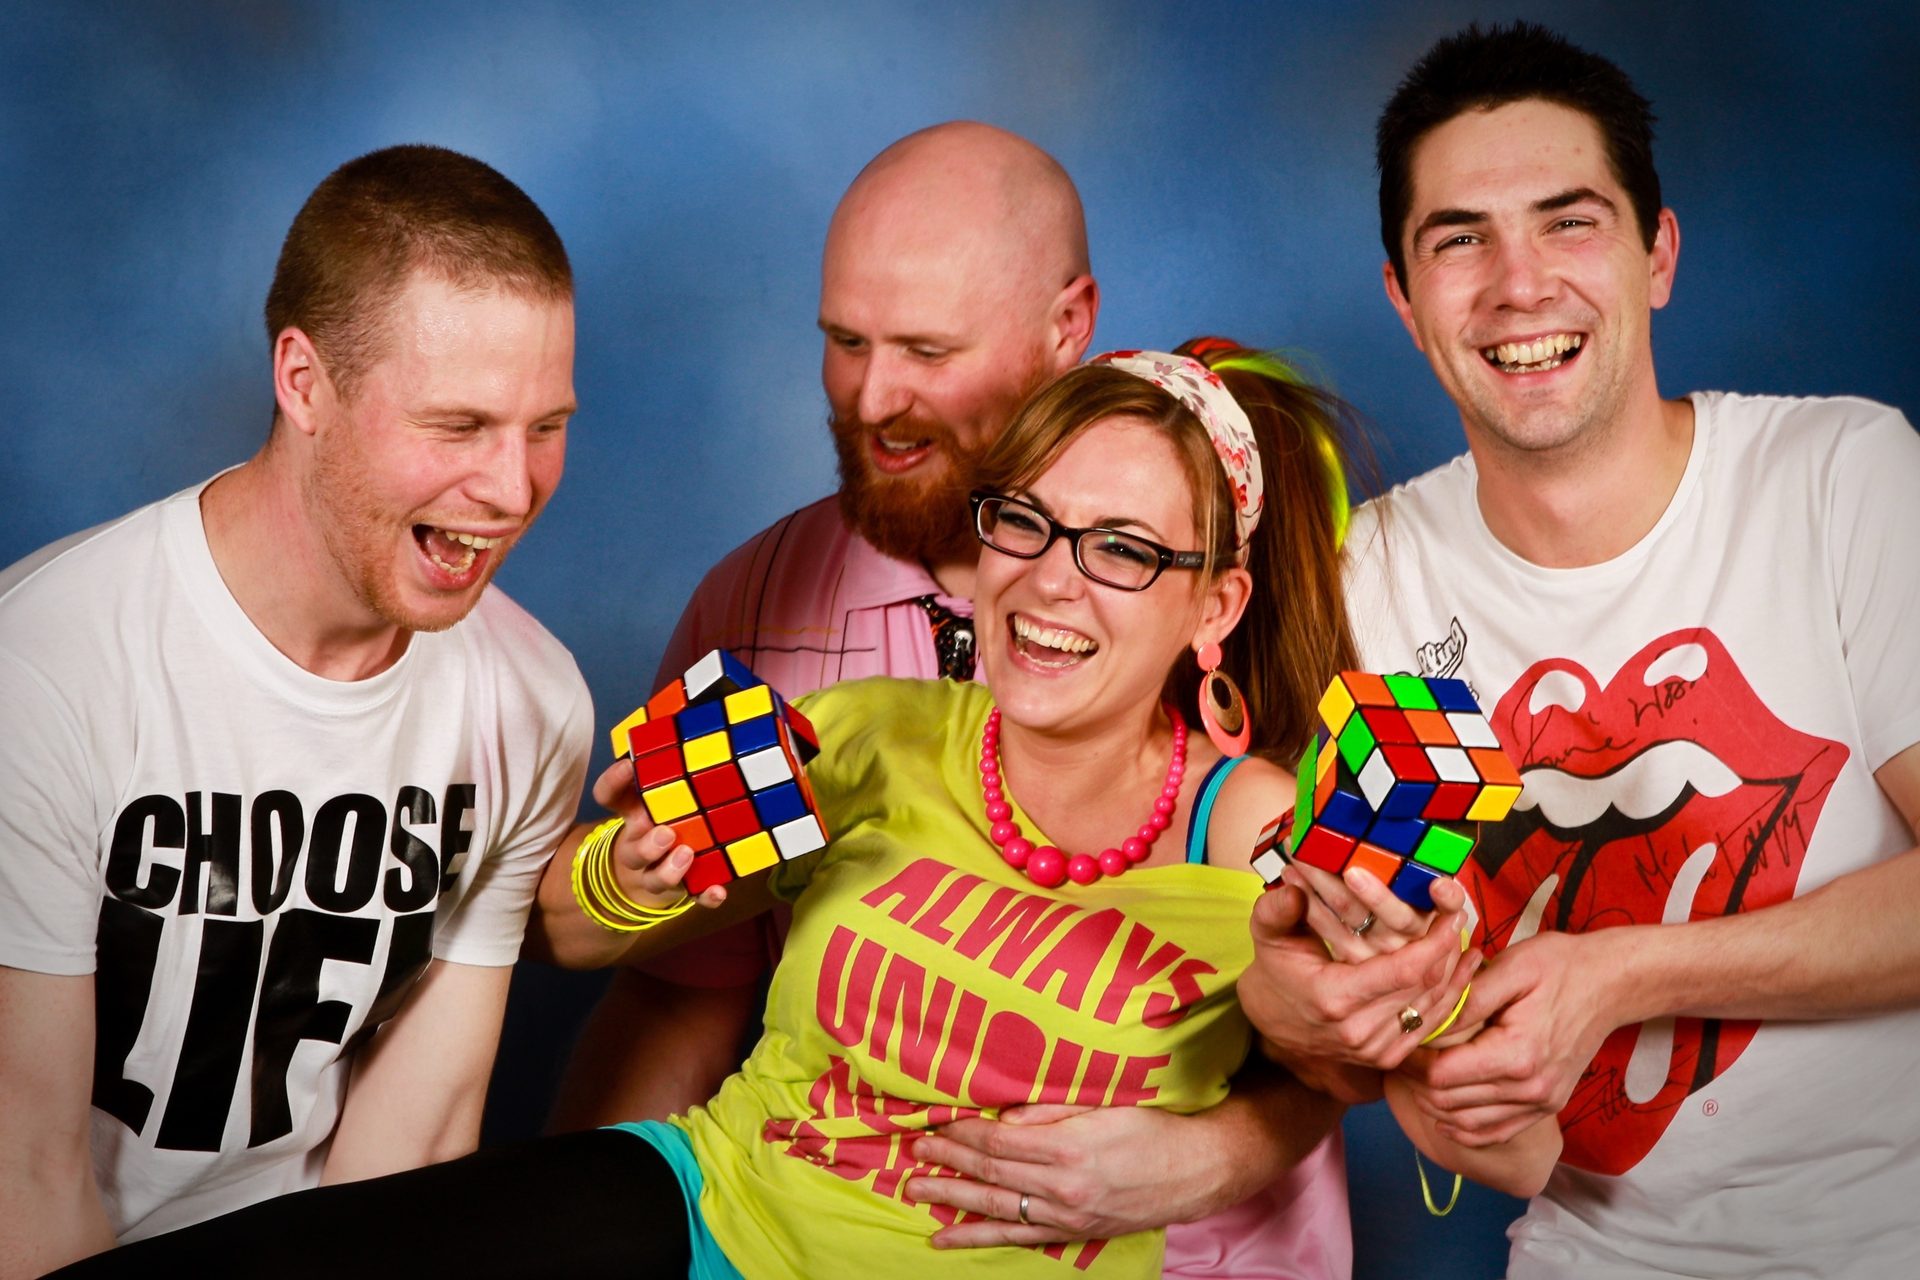 80s Party Band. Rubix Cube. Born In The 80s band. Choose life. 